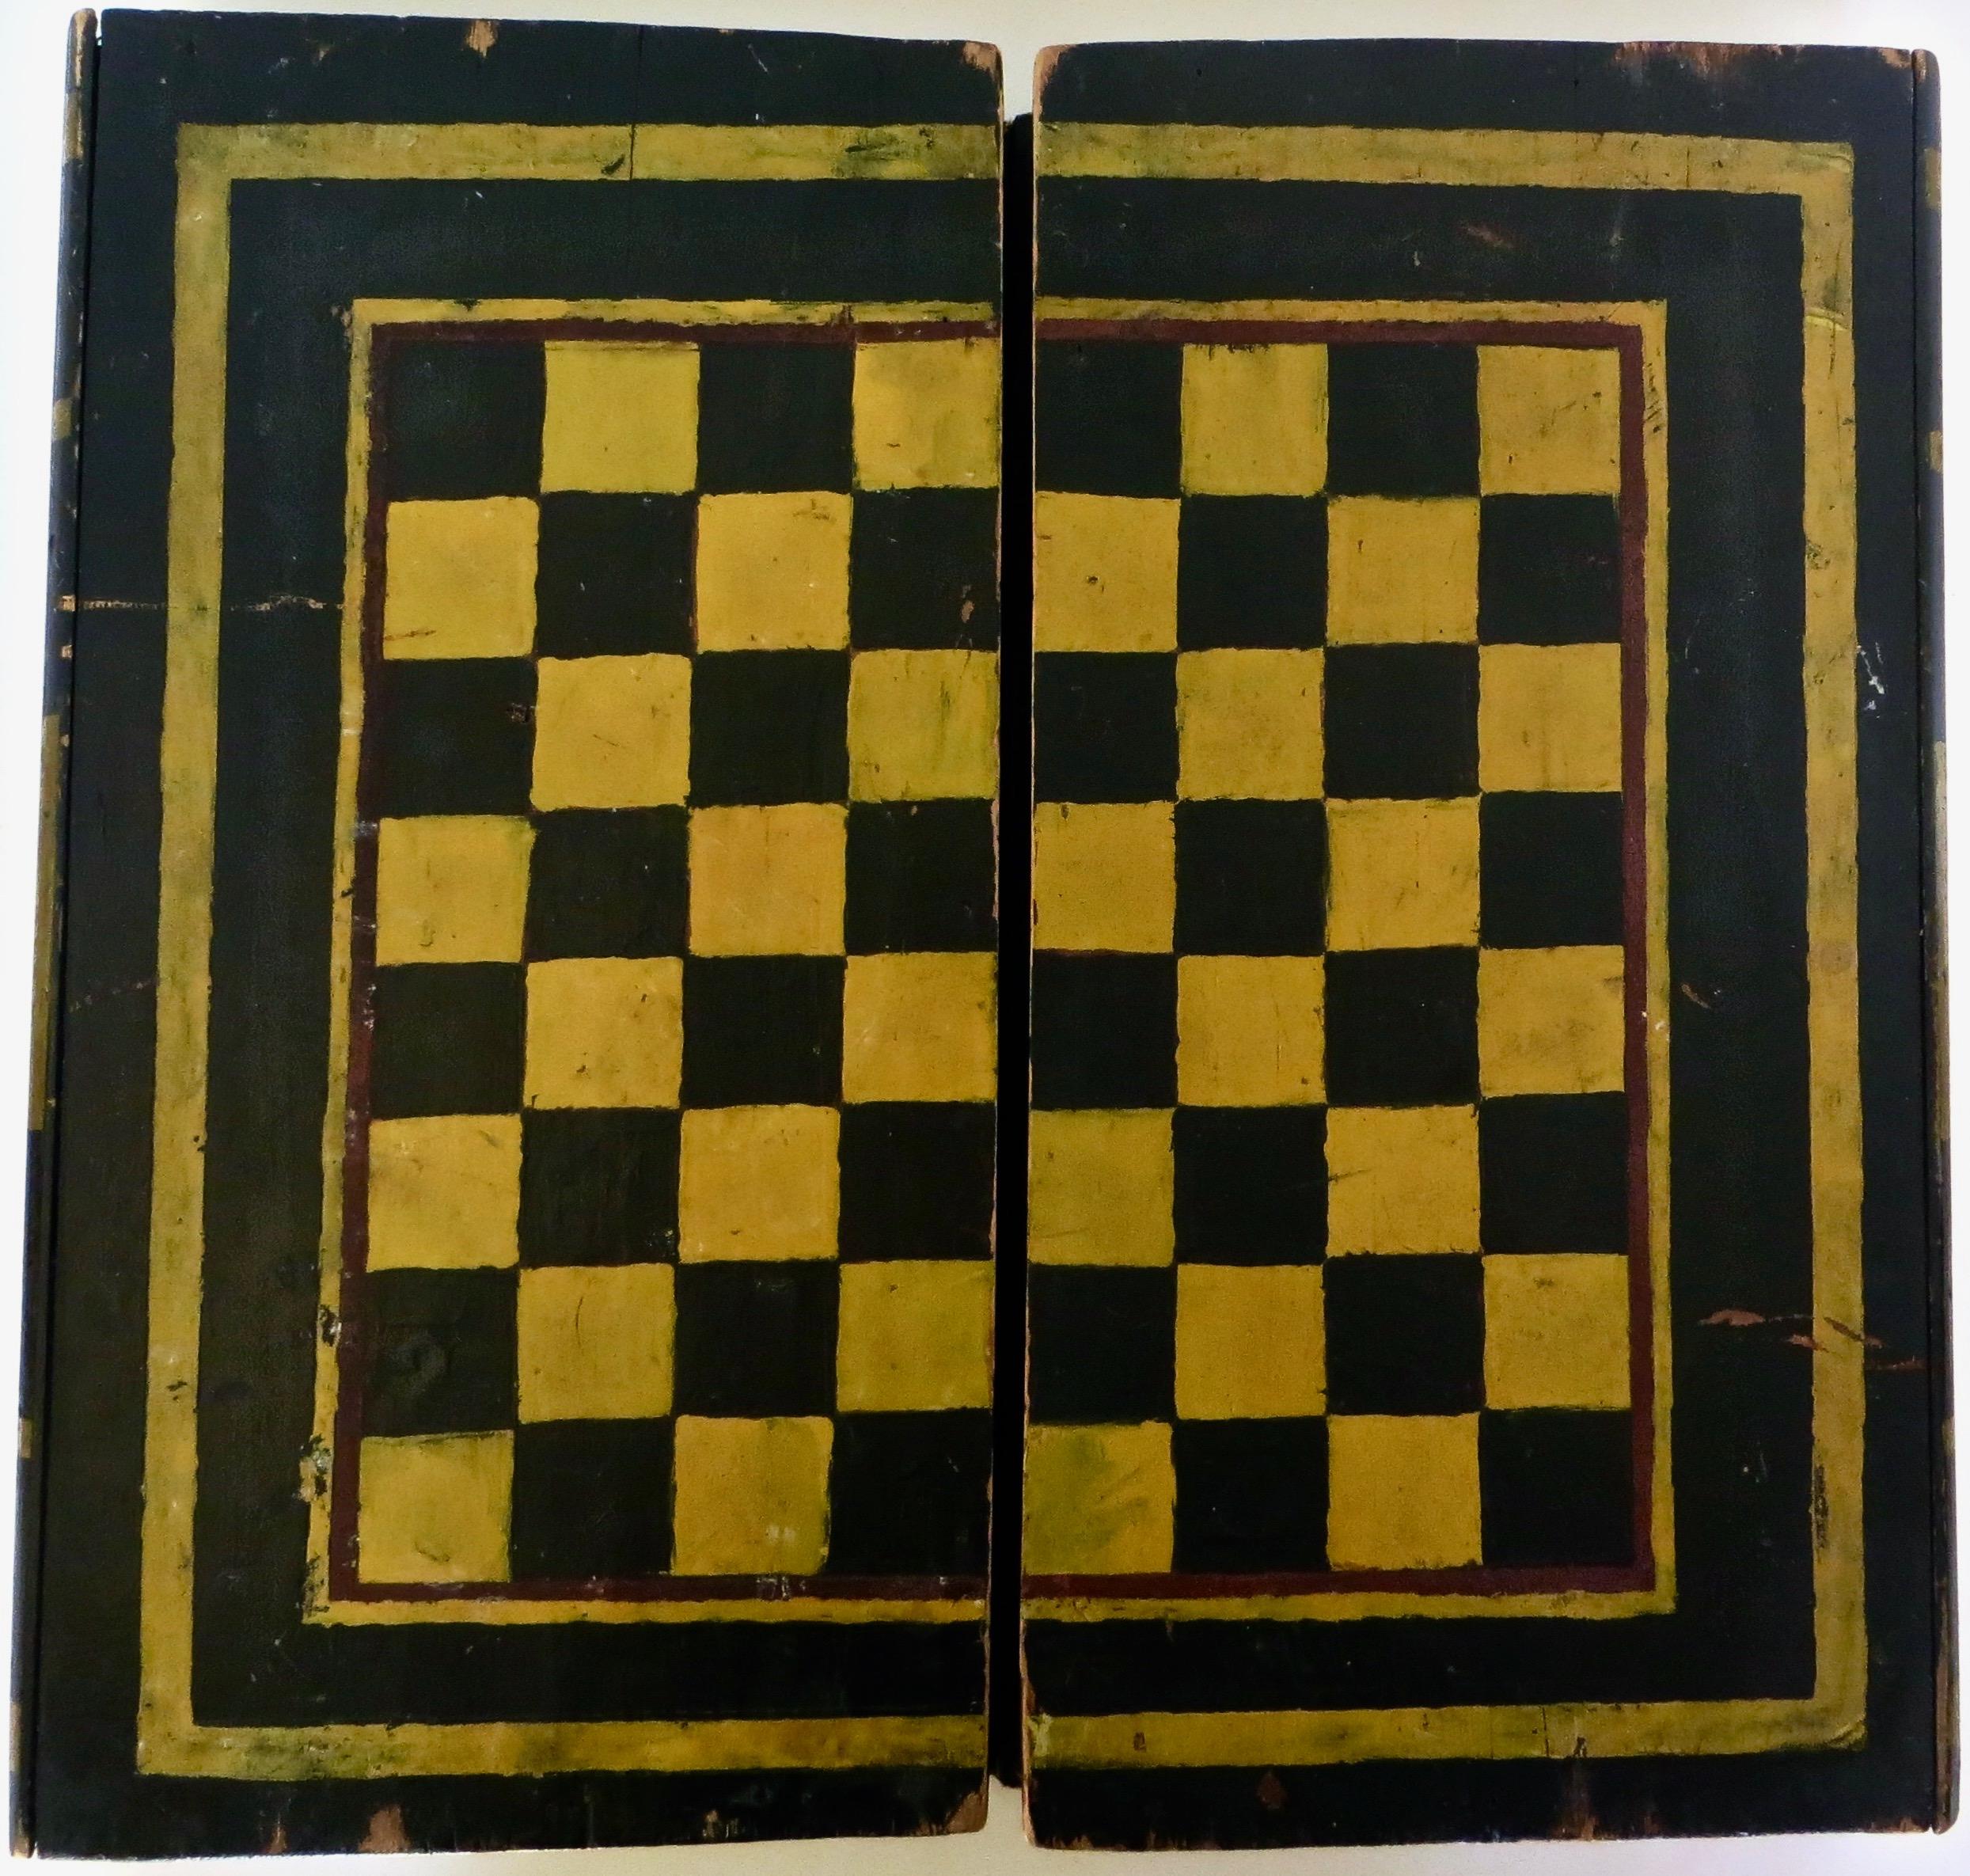 Very early American wooden games board; probably the oldest I have handled, this dates to about circa 1835 and exhibits the markings of a typical cottage industry type manufacture (not unlike very early Noah's Arks). Obviously entirely hand crafted;